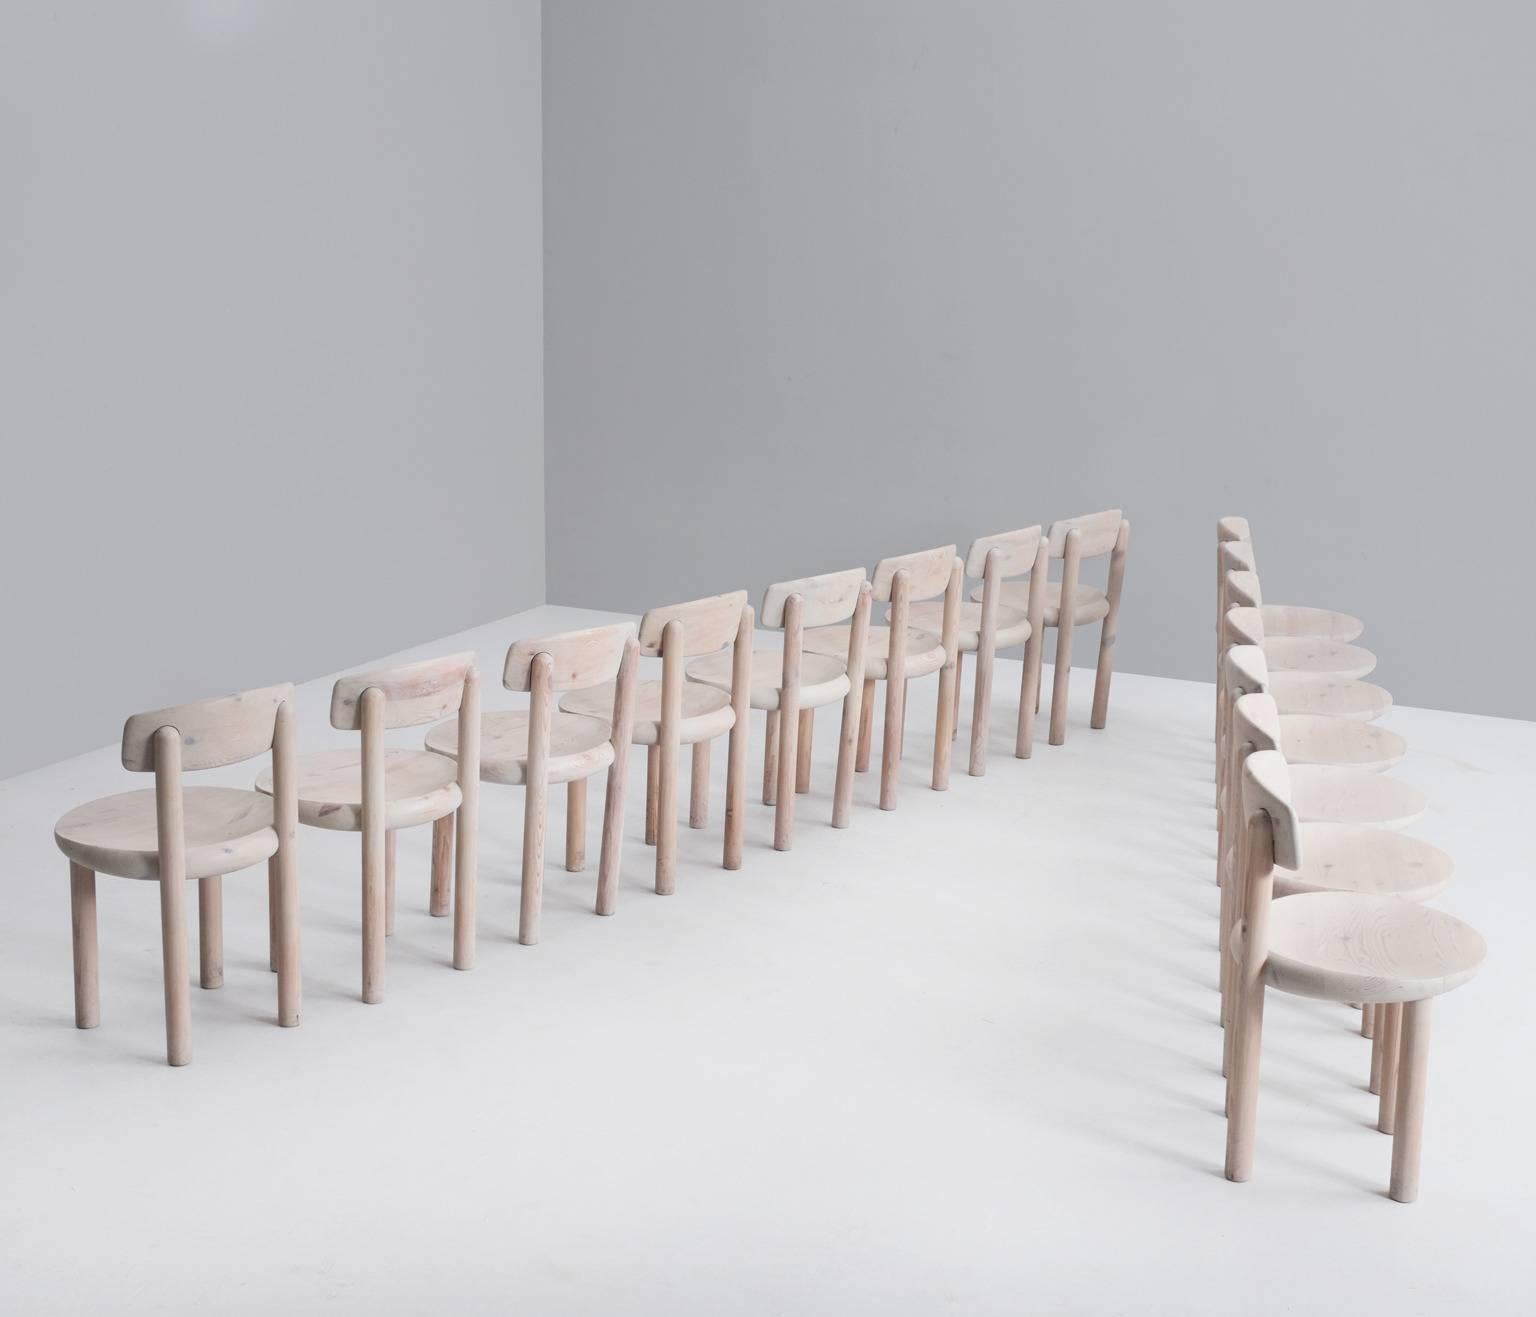 Set of 12 dining chairs in solid pine wood, with a white wash finish, Denmark, 1970s.

This chair is very well made, with basic construction and solid legs, seat and back which gives the chair a strong expression. 

This basic shaped design has